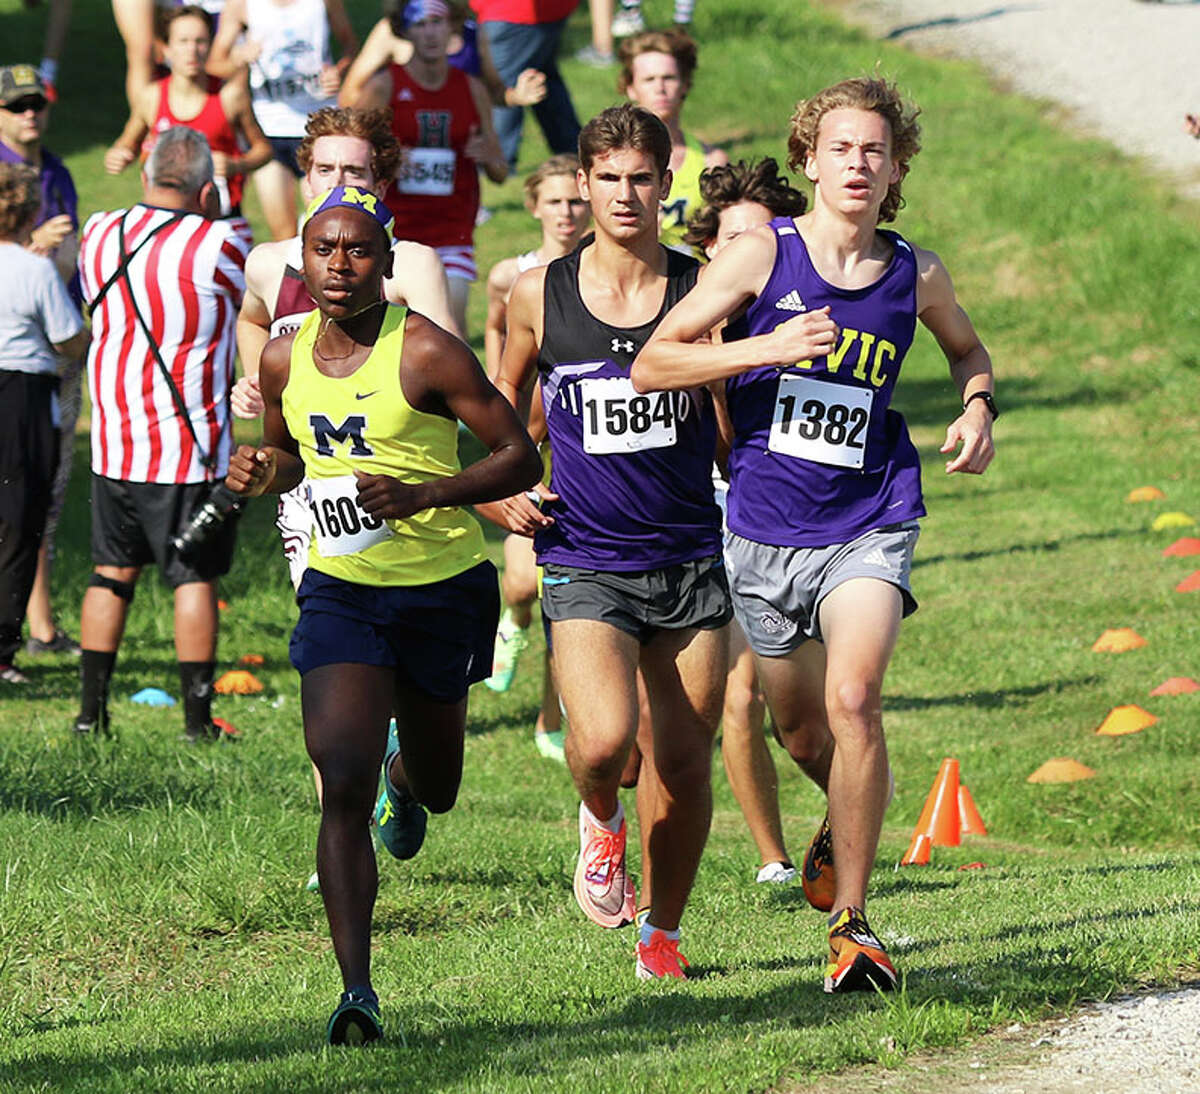 CM's Jackson Collman (right) runs with Marion's Benja Stone (left) and Litchfield's Camden Quarton on Saturday at the Highland Invite at Fireman's Park in Alhambra.